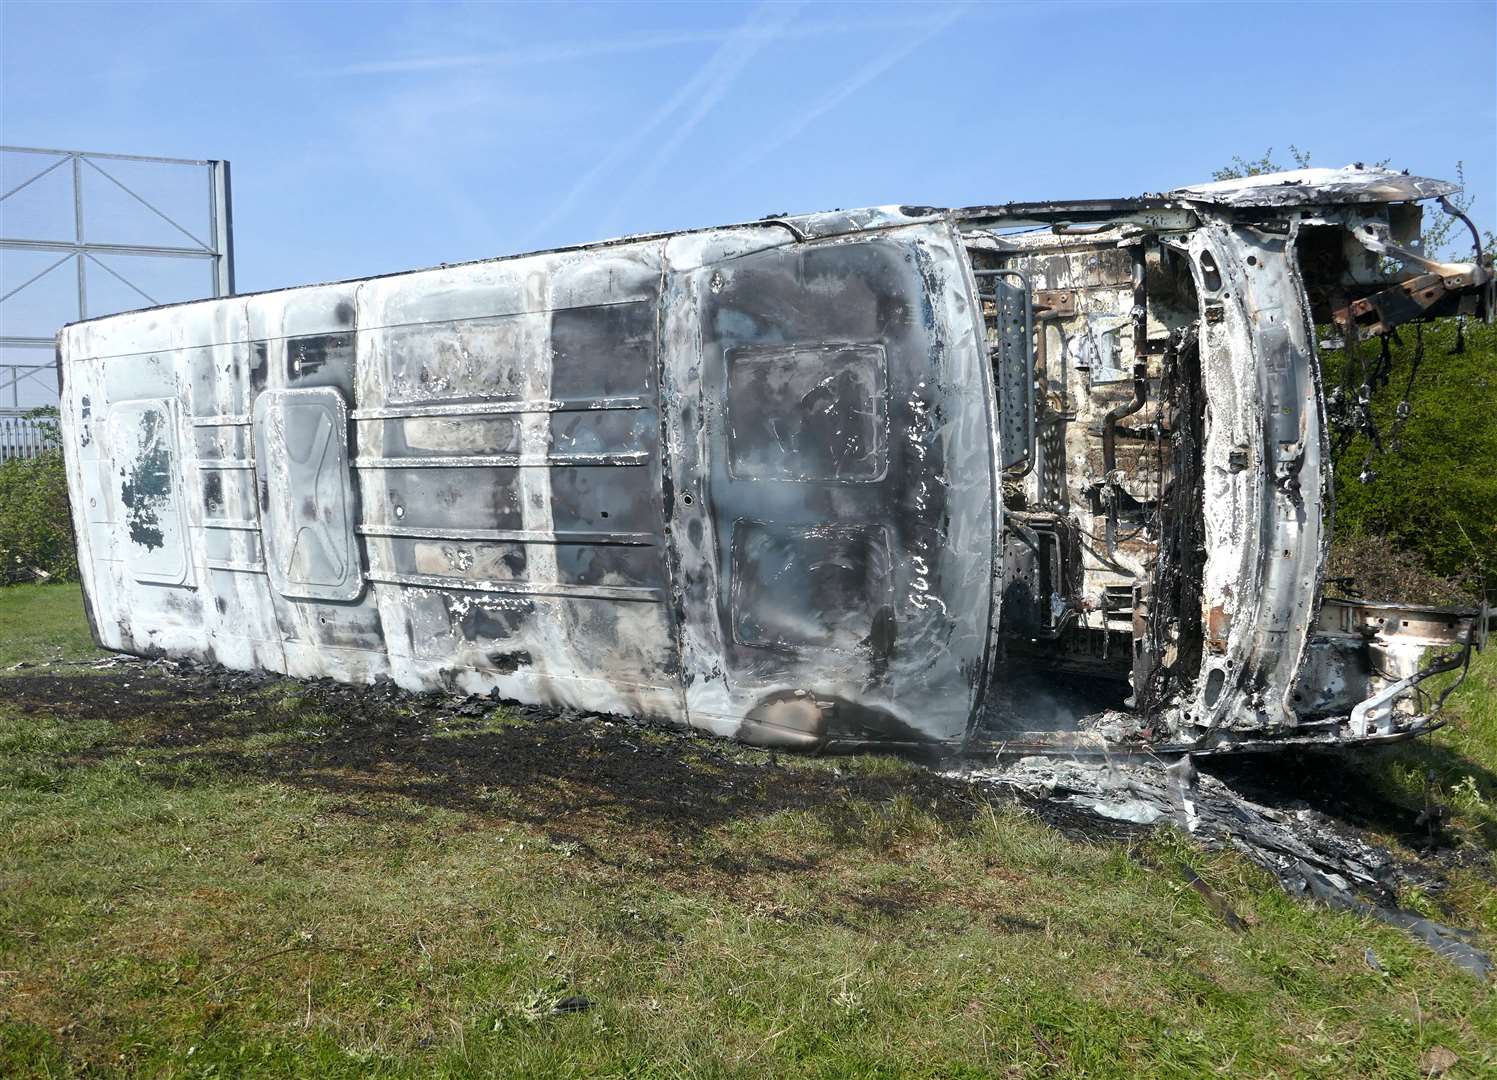 On April 15 another burnt-out bus found on land near Wharf Road, Gravesend